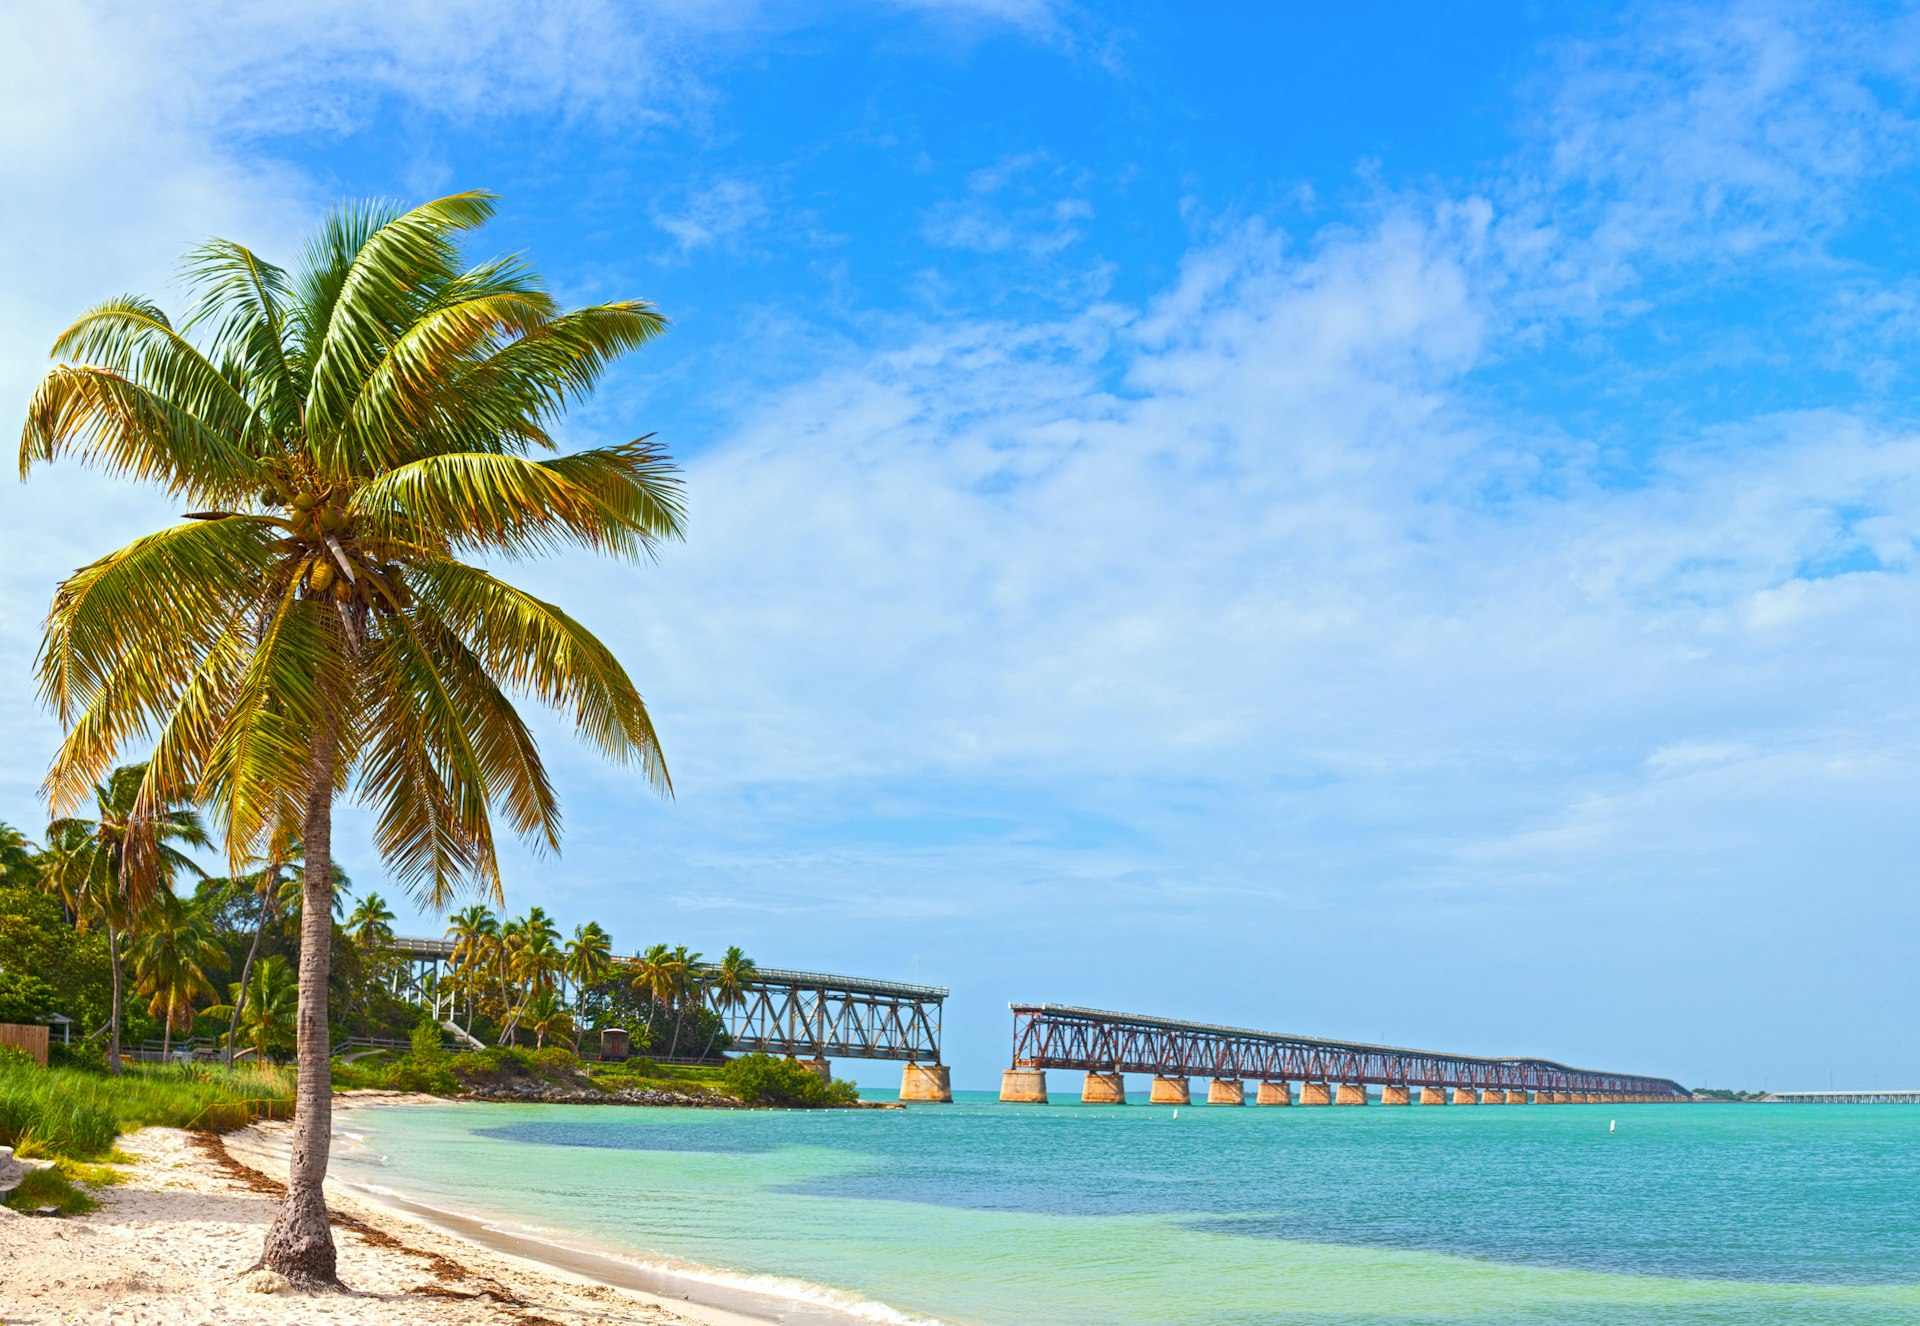 A tropical beach with a railroad bridge in the background